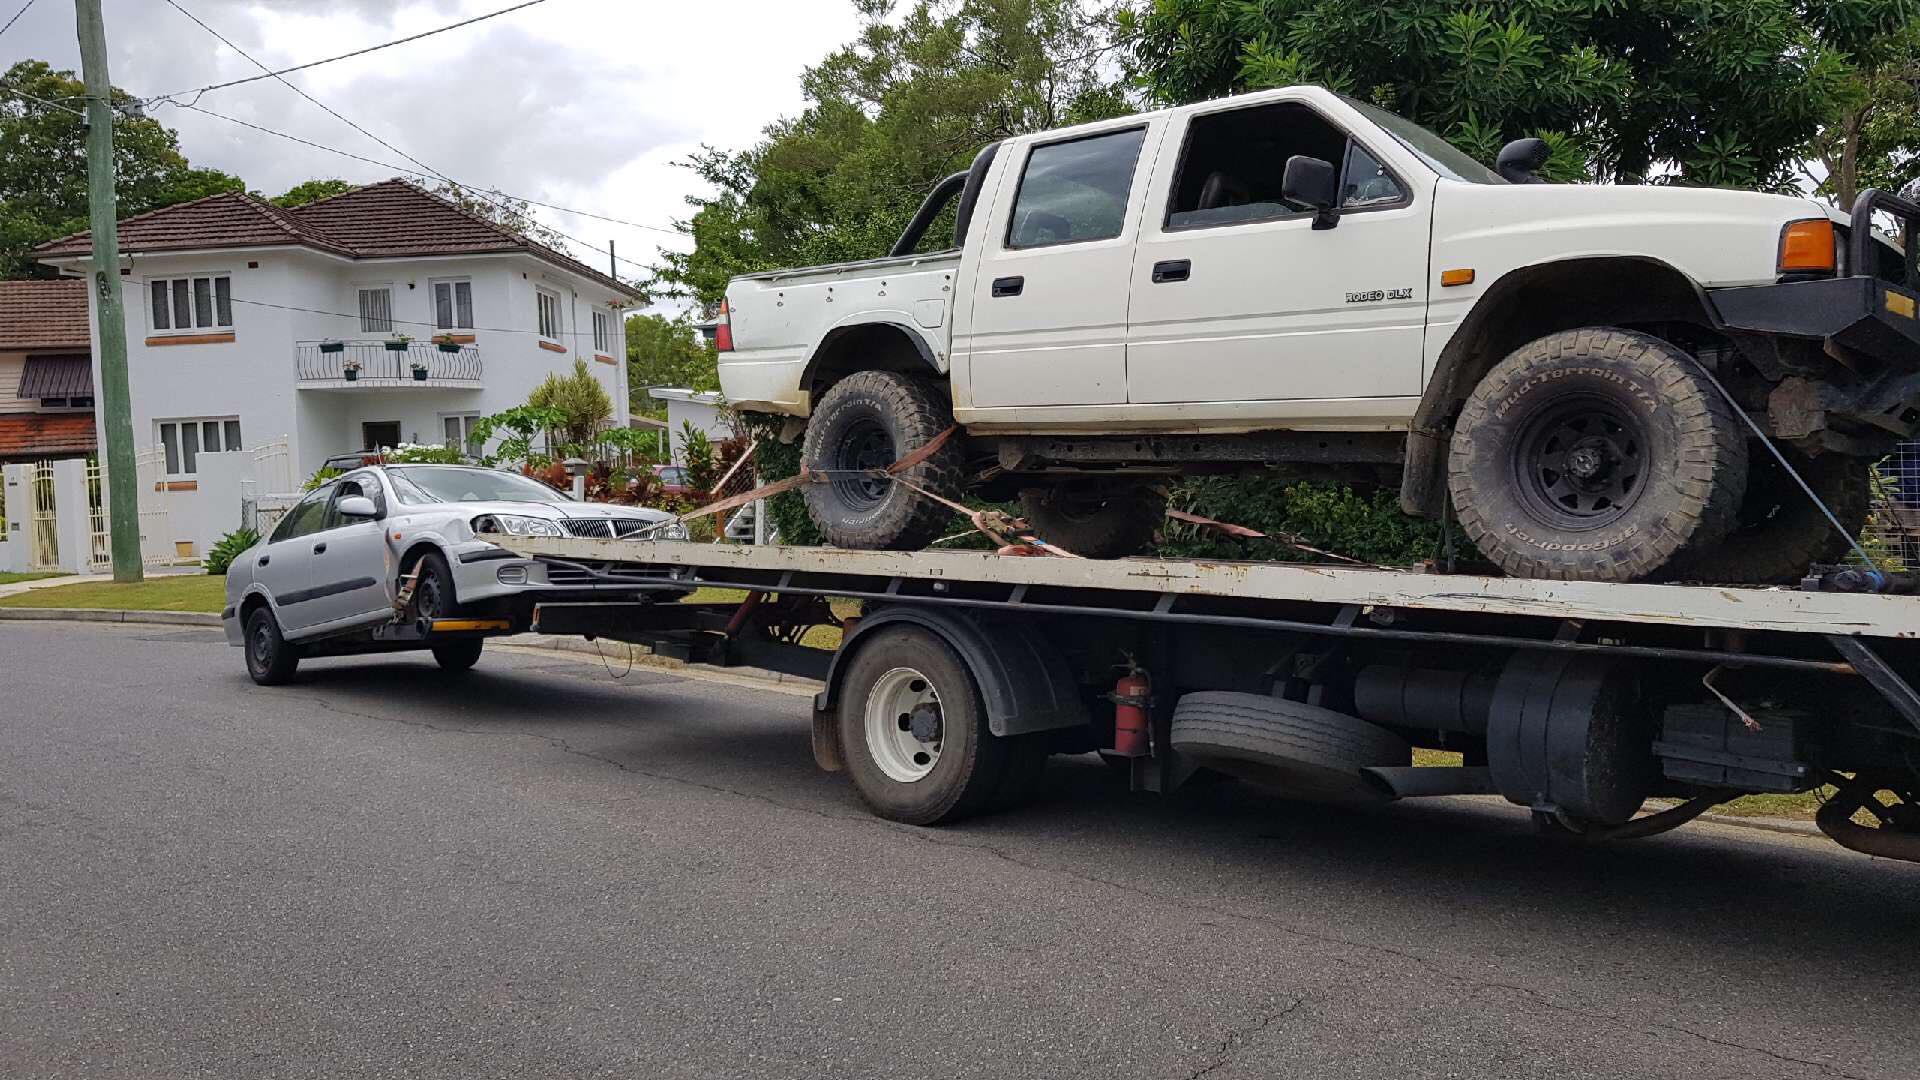 Get Up To $9999 Cash for Scrap Cars Adelaide | Free Removal